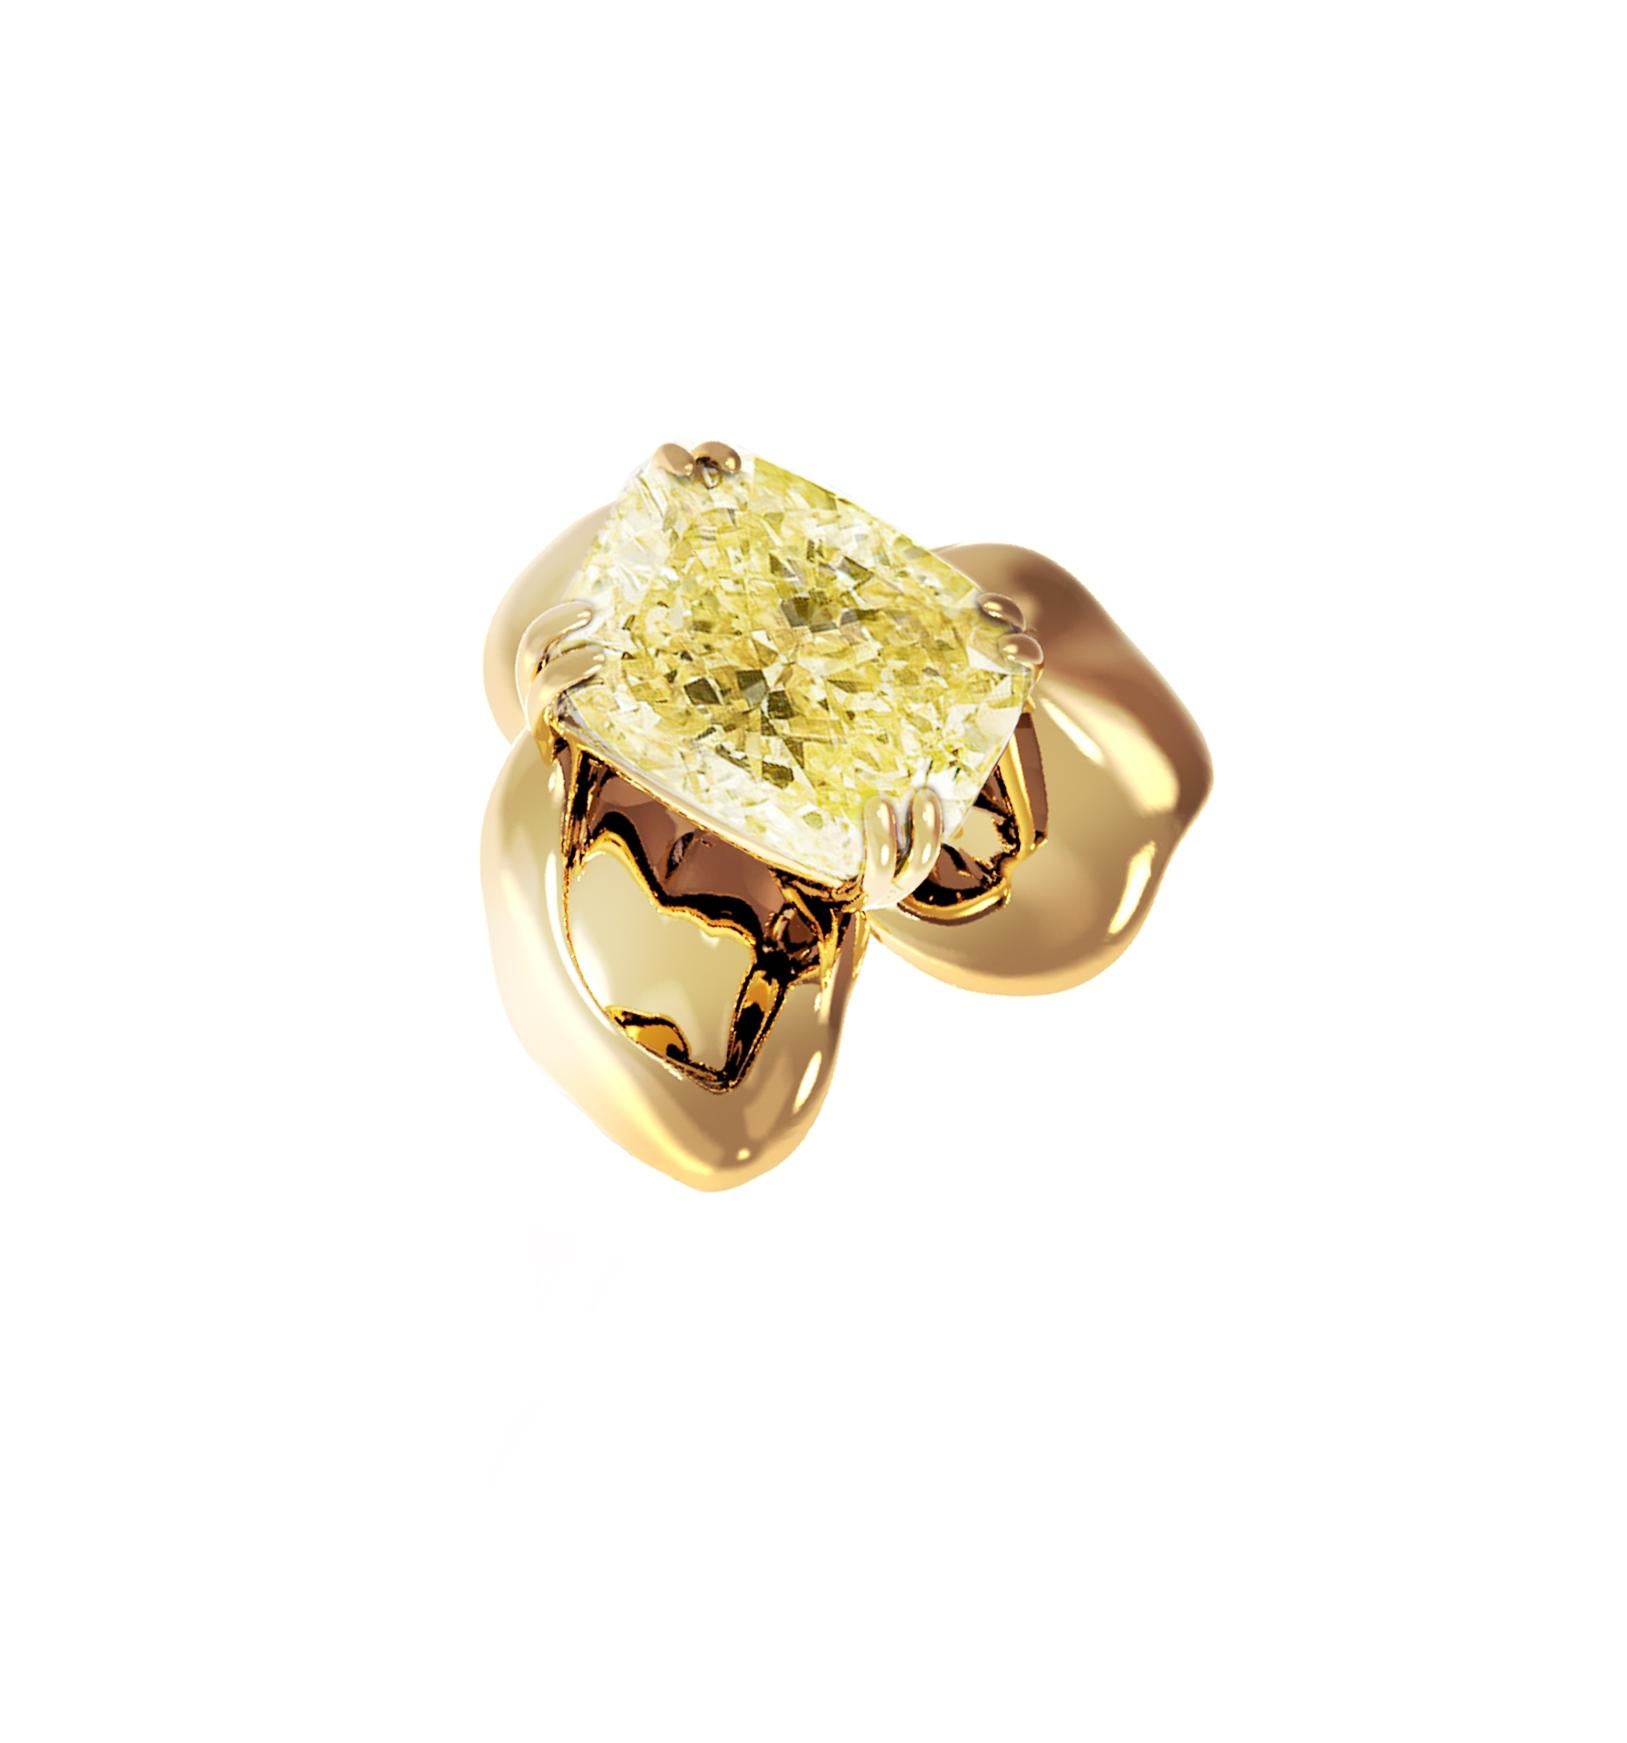 This 18 karat yellow gold Buttercup brooch features natural yellow cushion diamond (Y-Z, SI), weighing 1 carat. The cushion cut is the best for yellow diamonds, and the gem is carefully selected by the artist for its exceptional polishing and other